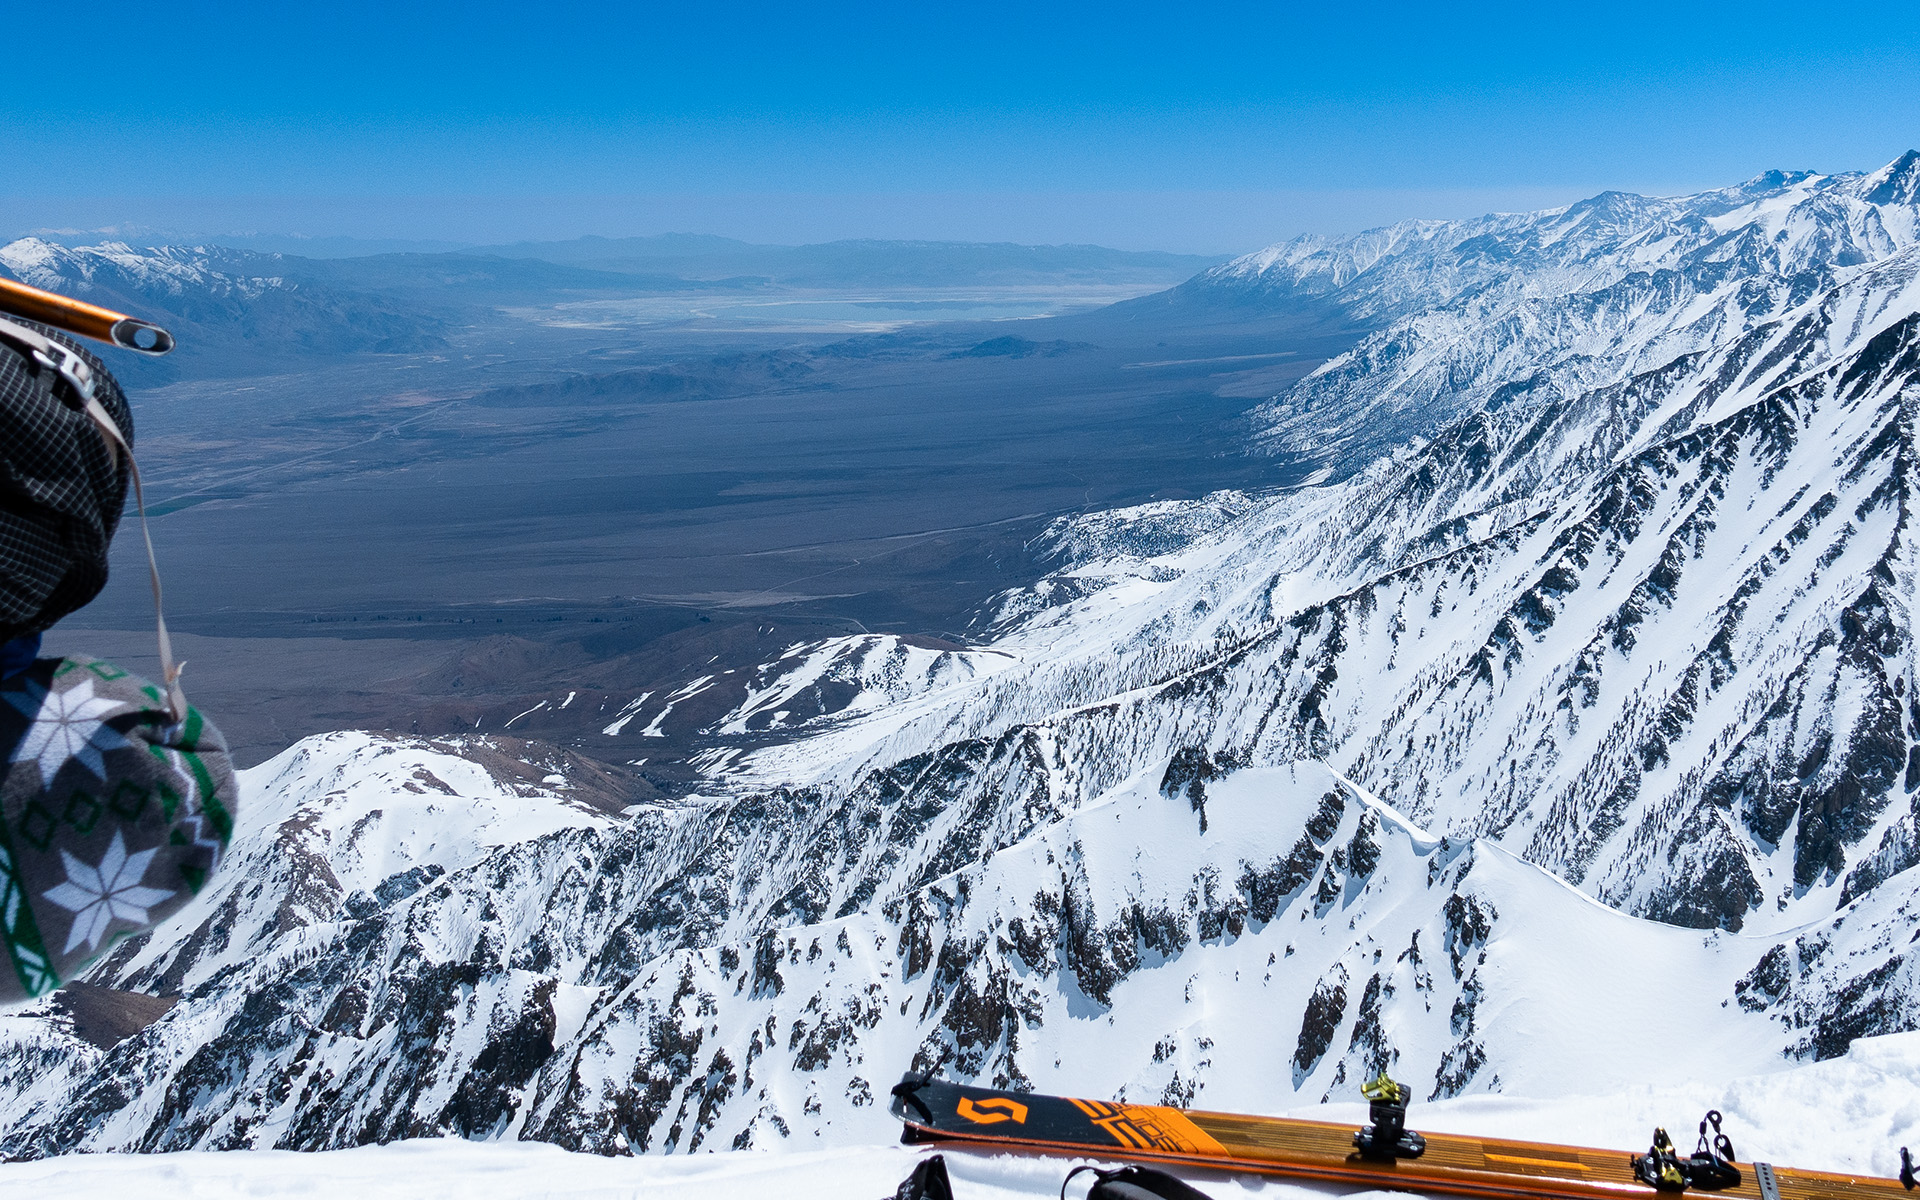 Owens Valley, Owens Lake, & the South Sierra from Mount Baxter, California